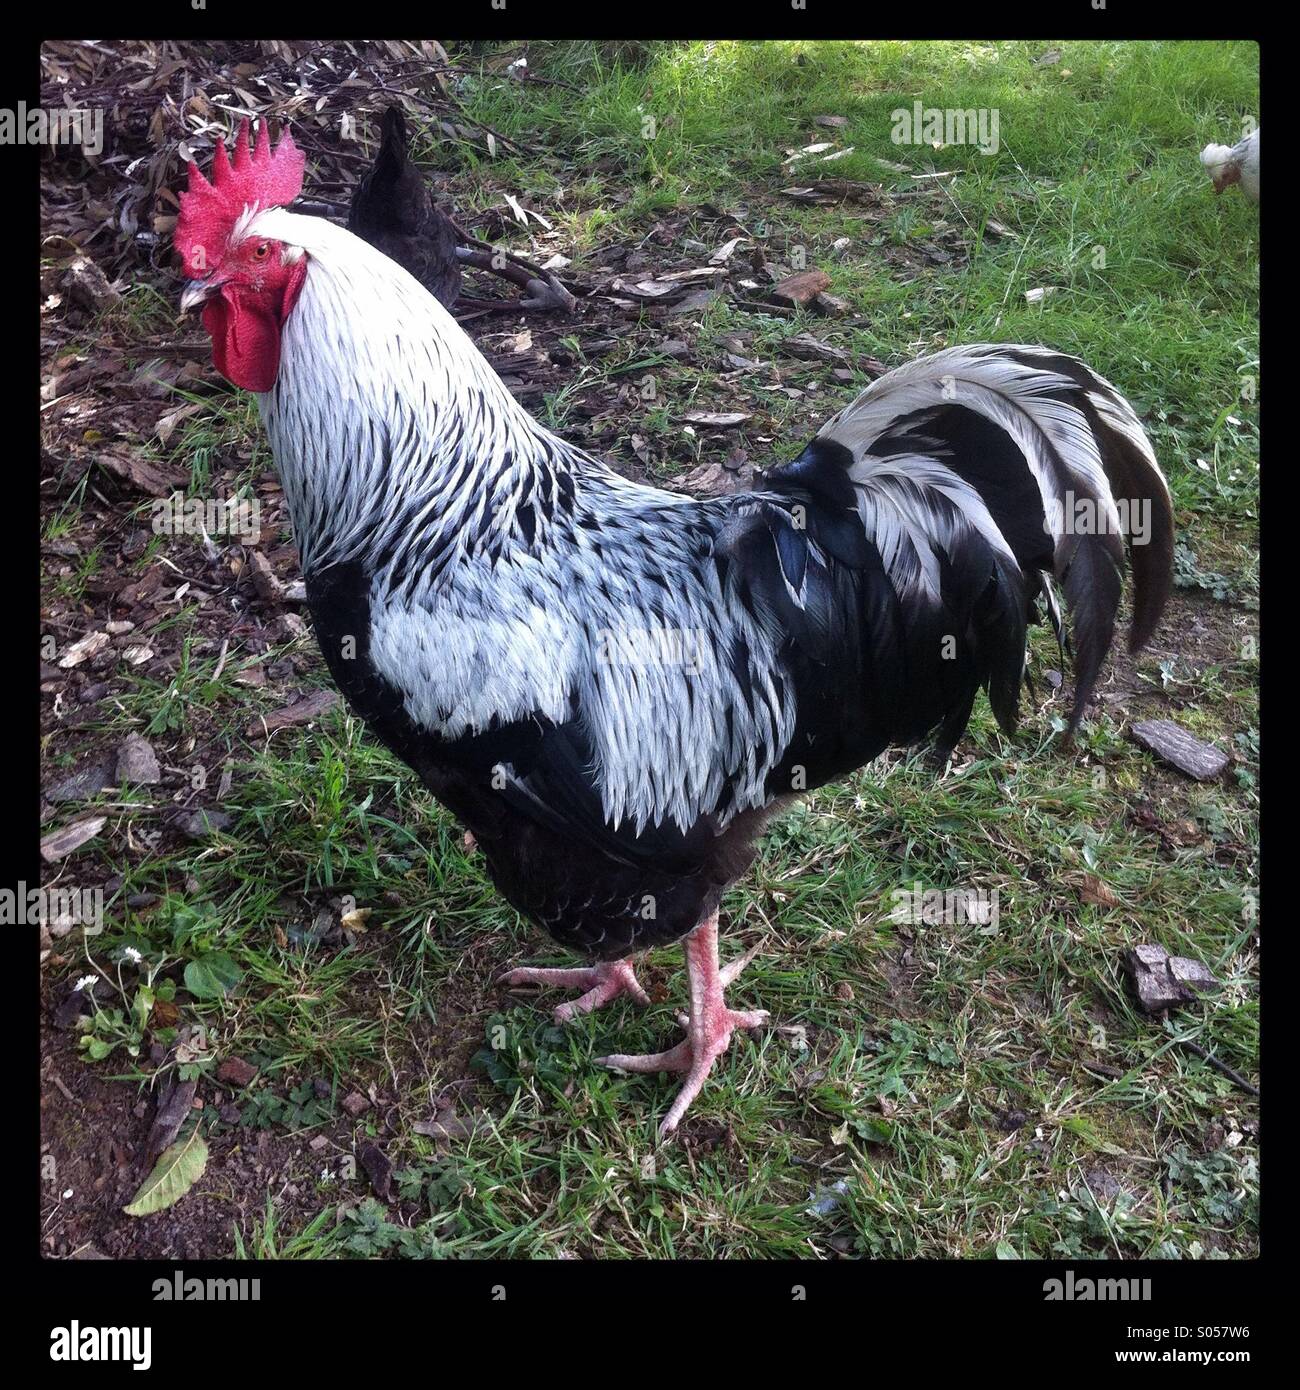 Large silver Sussex cockerel or rooster Stock Photo